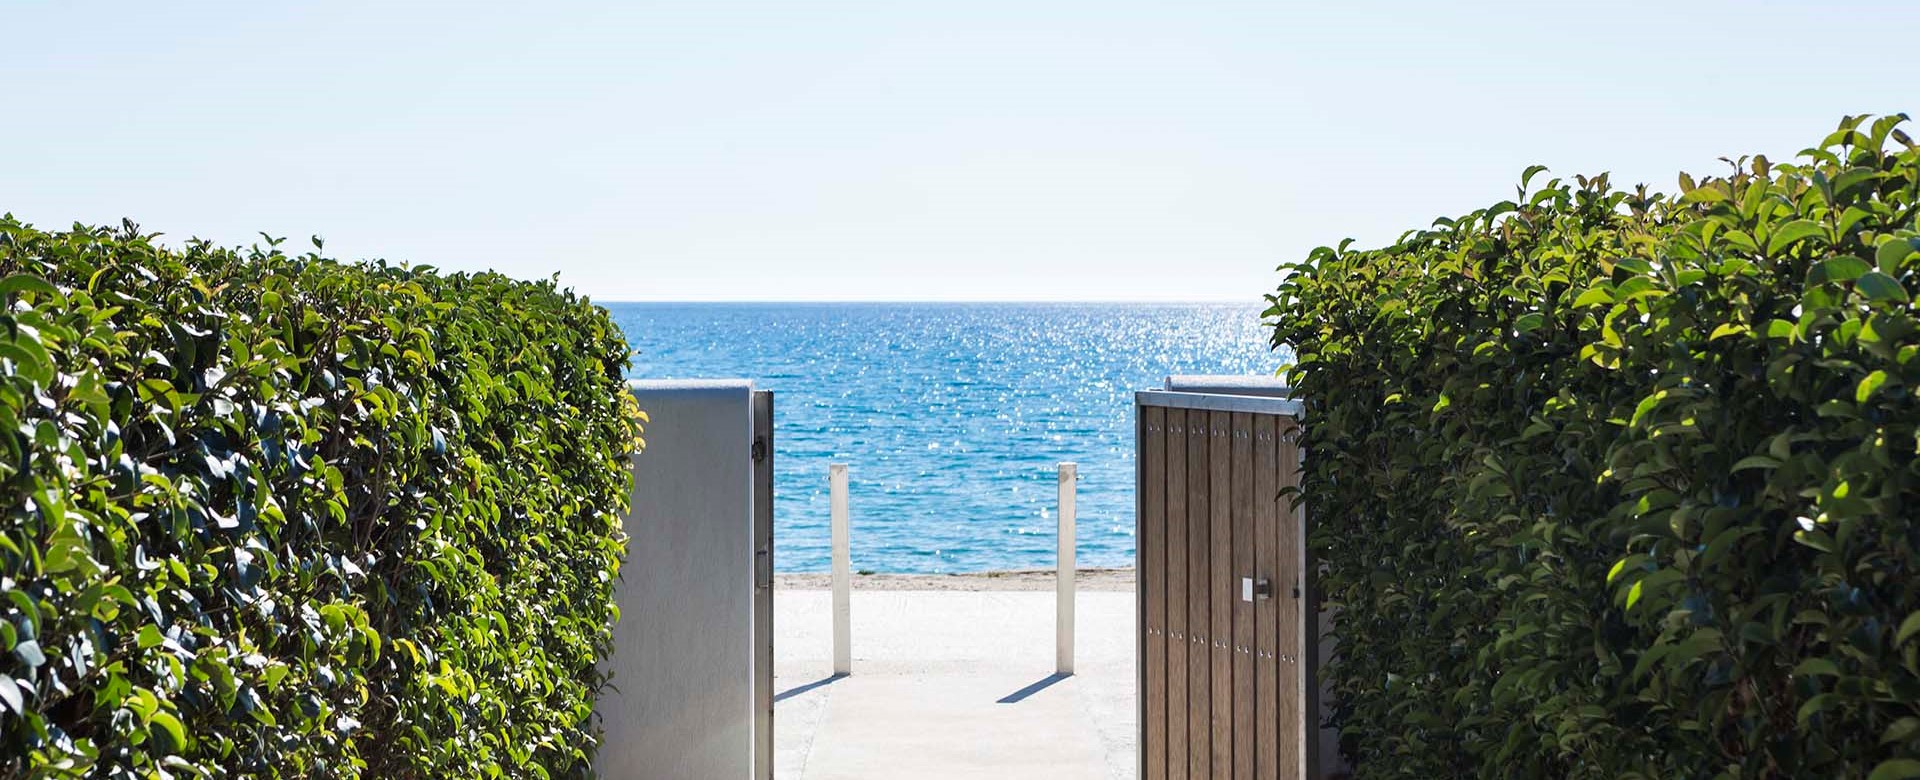 Step out of the Beachfront Suites, straight onto the coastline at Lourdata, Kefalonia